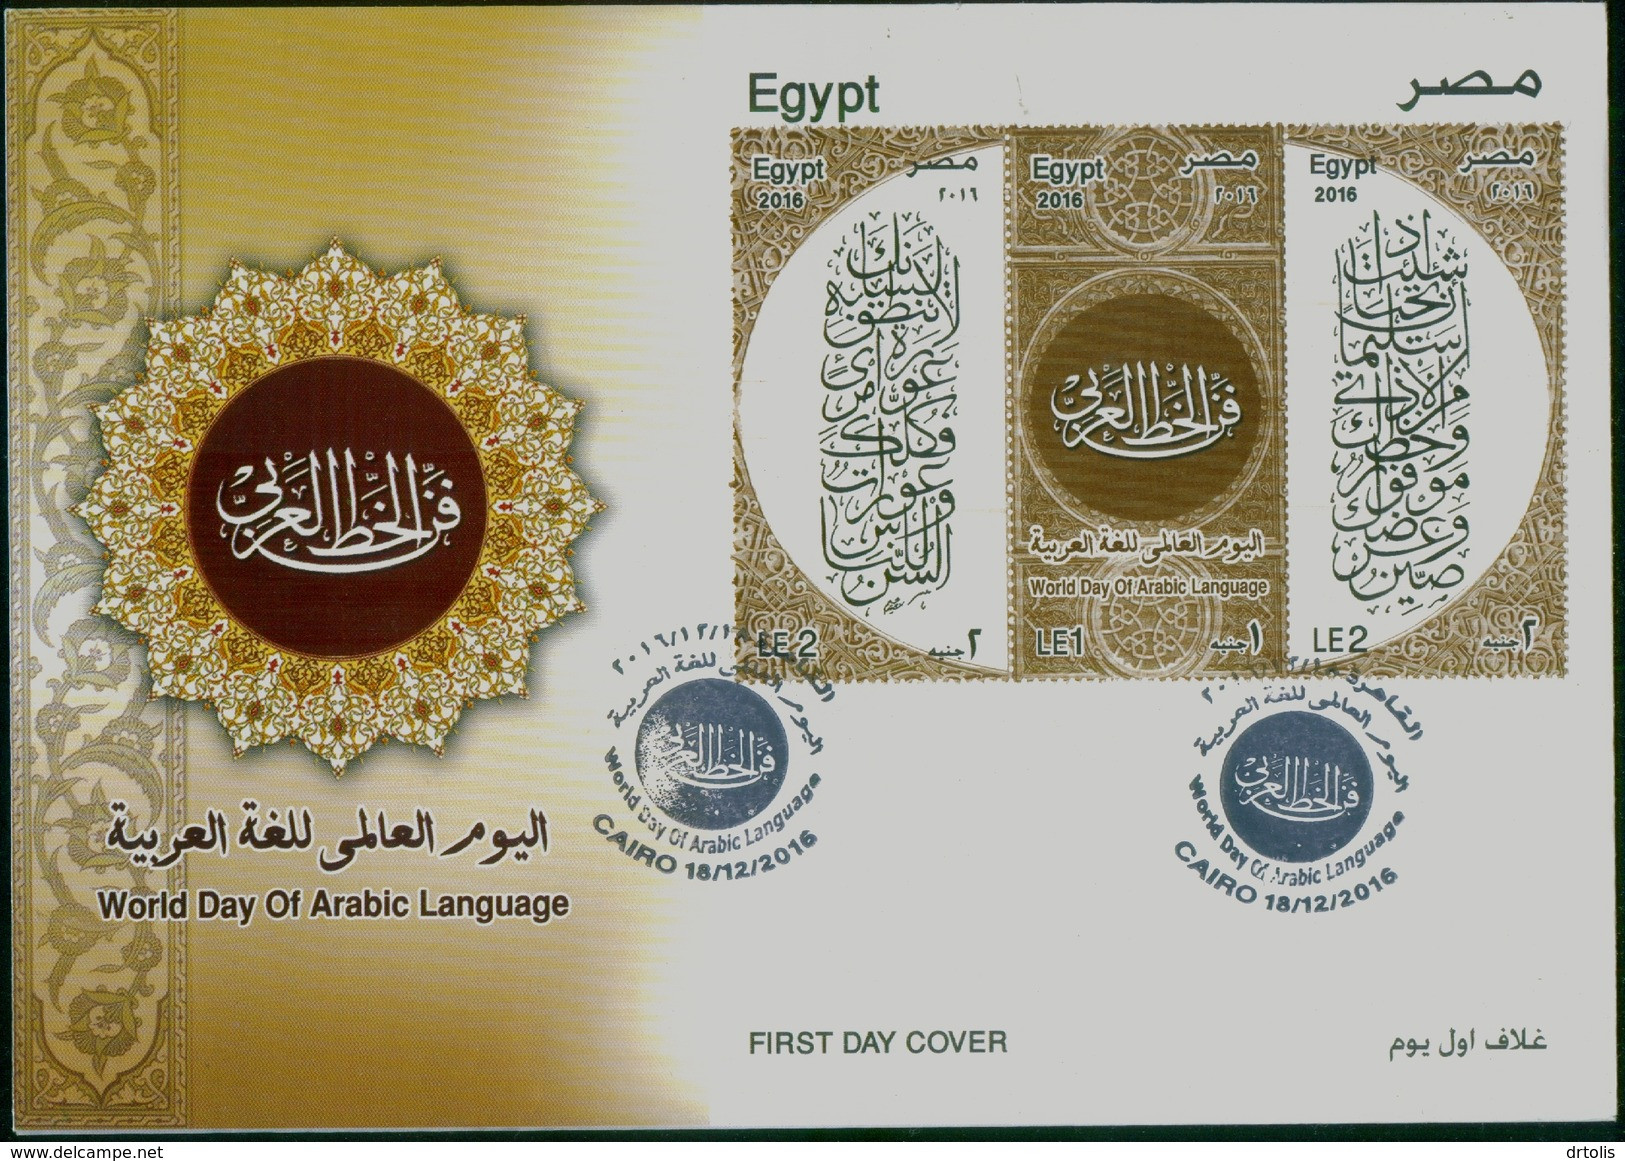 EGYPT / 2016 / WORLD DAY OF ARABIC LANGUAGE / THE ART OF ARABIC CALLIGRAPHY / FDC - Lettres & Documents